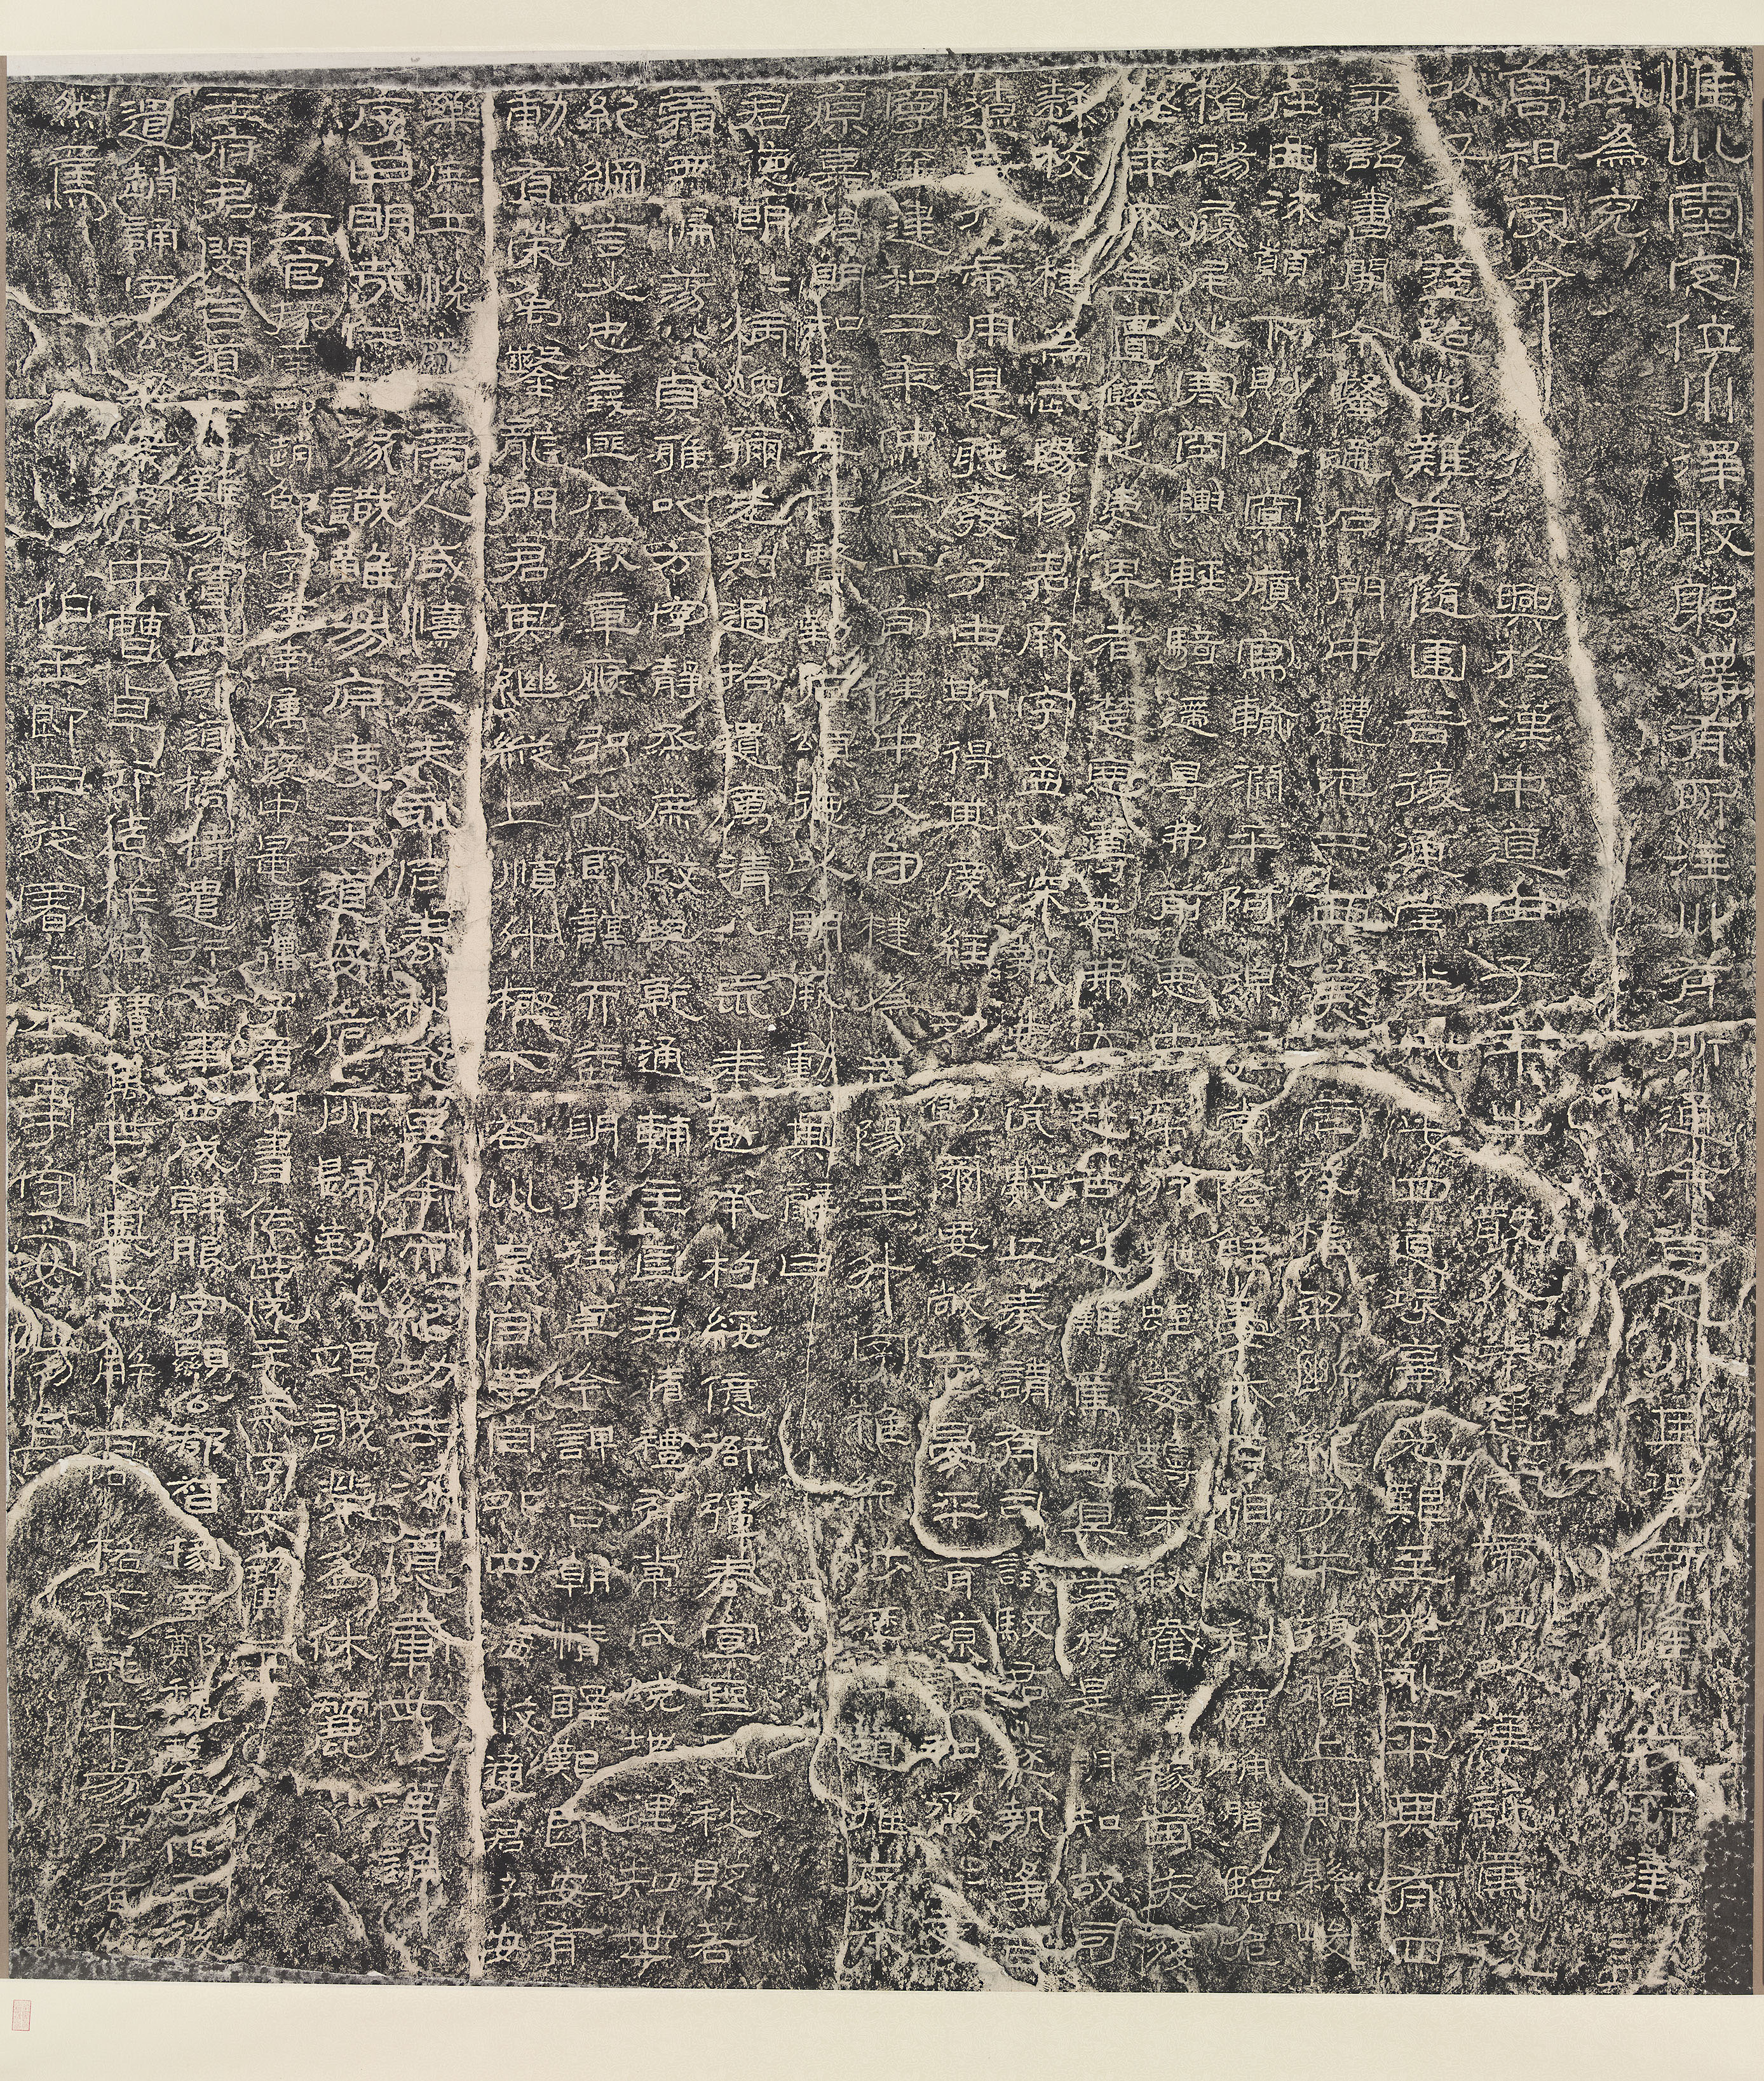 Ink Rubbing of the “Shimen Eulogy”Anonymous, Han dynasty